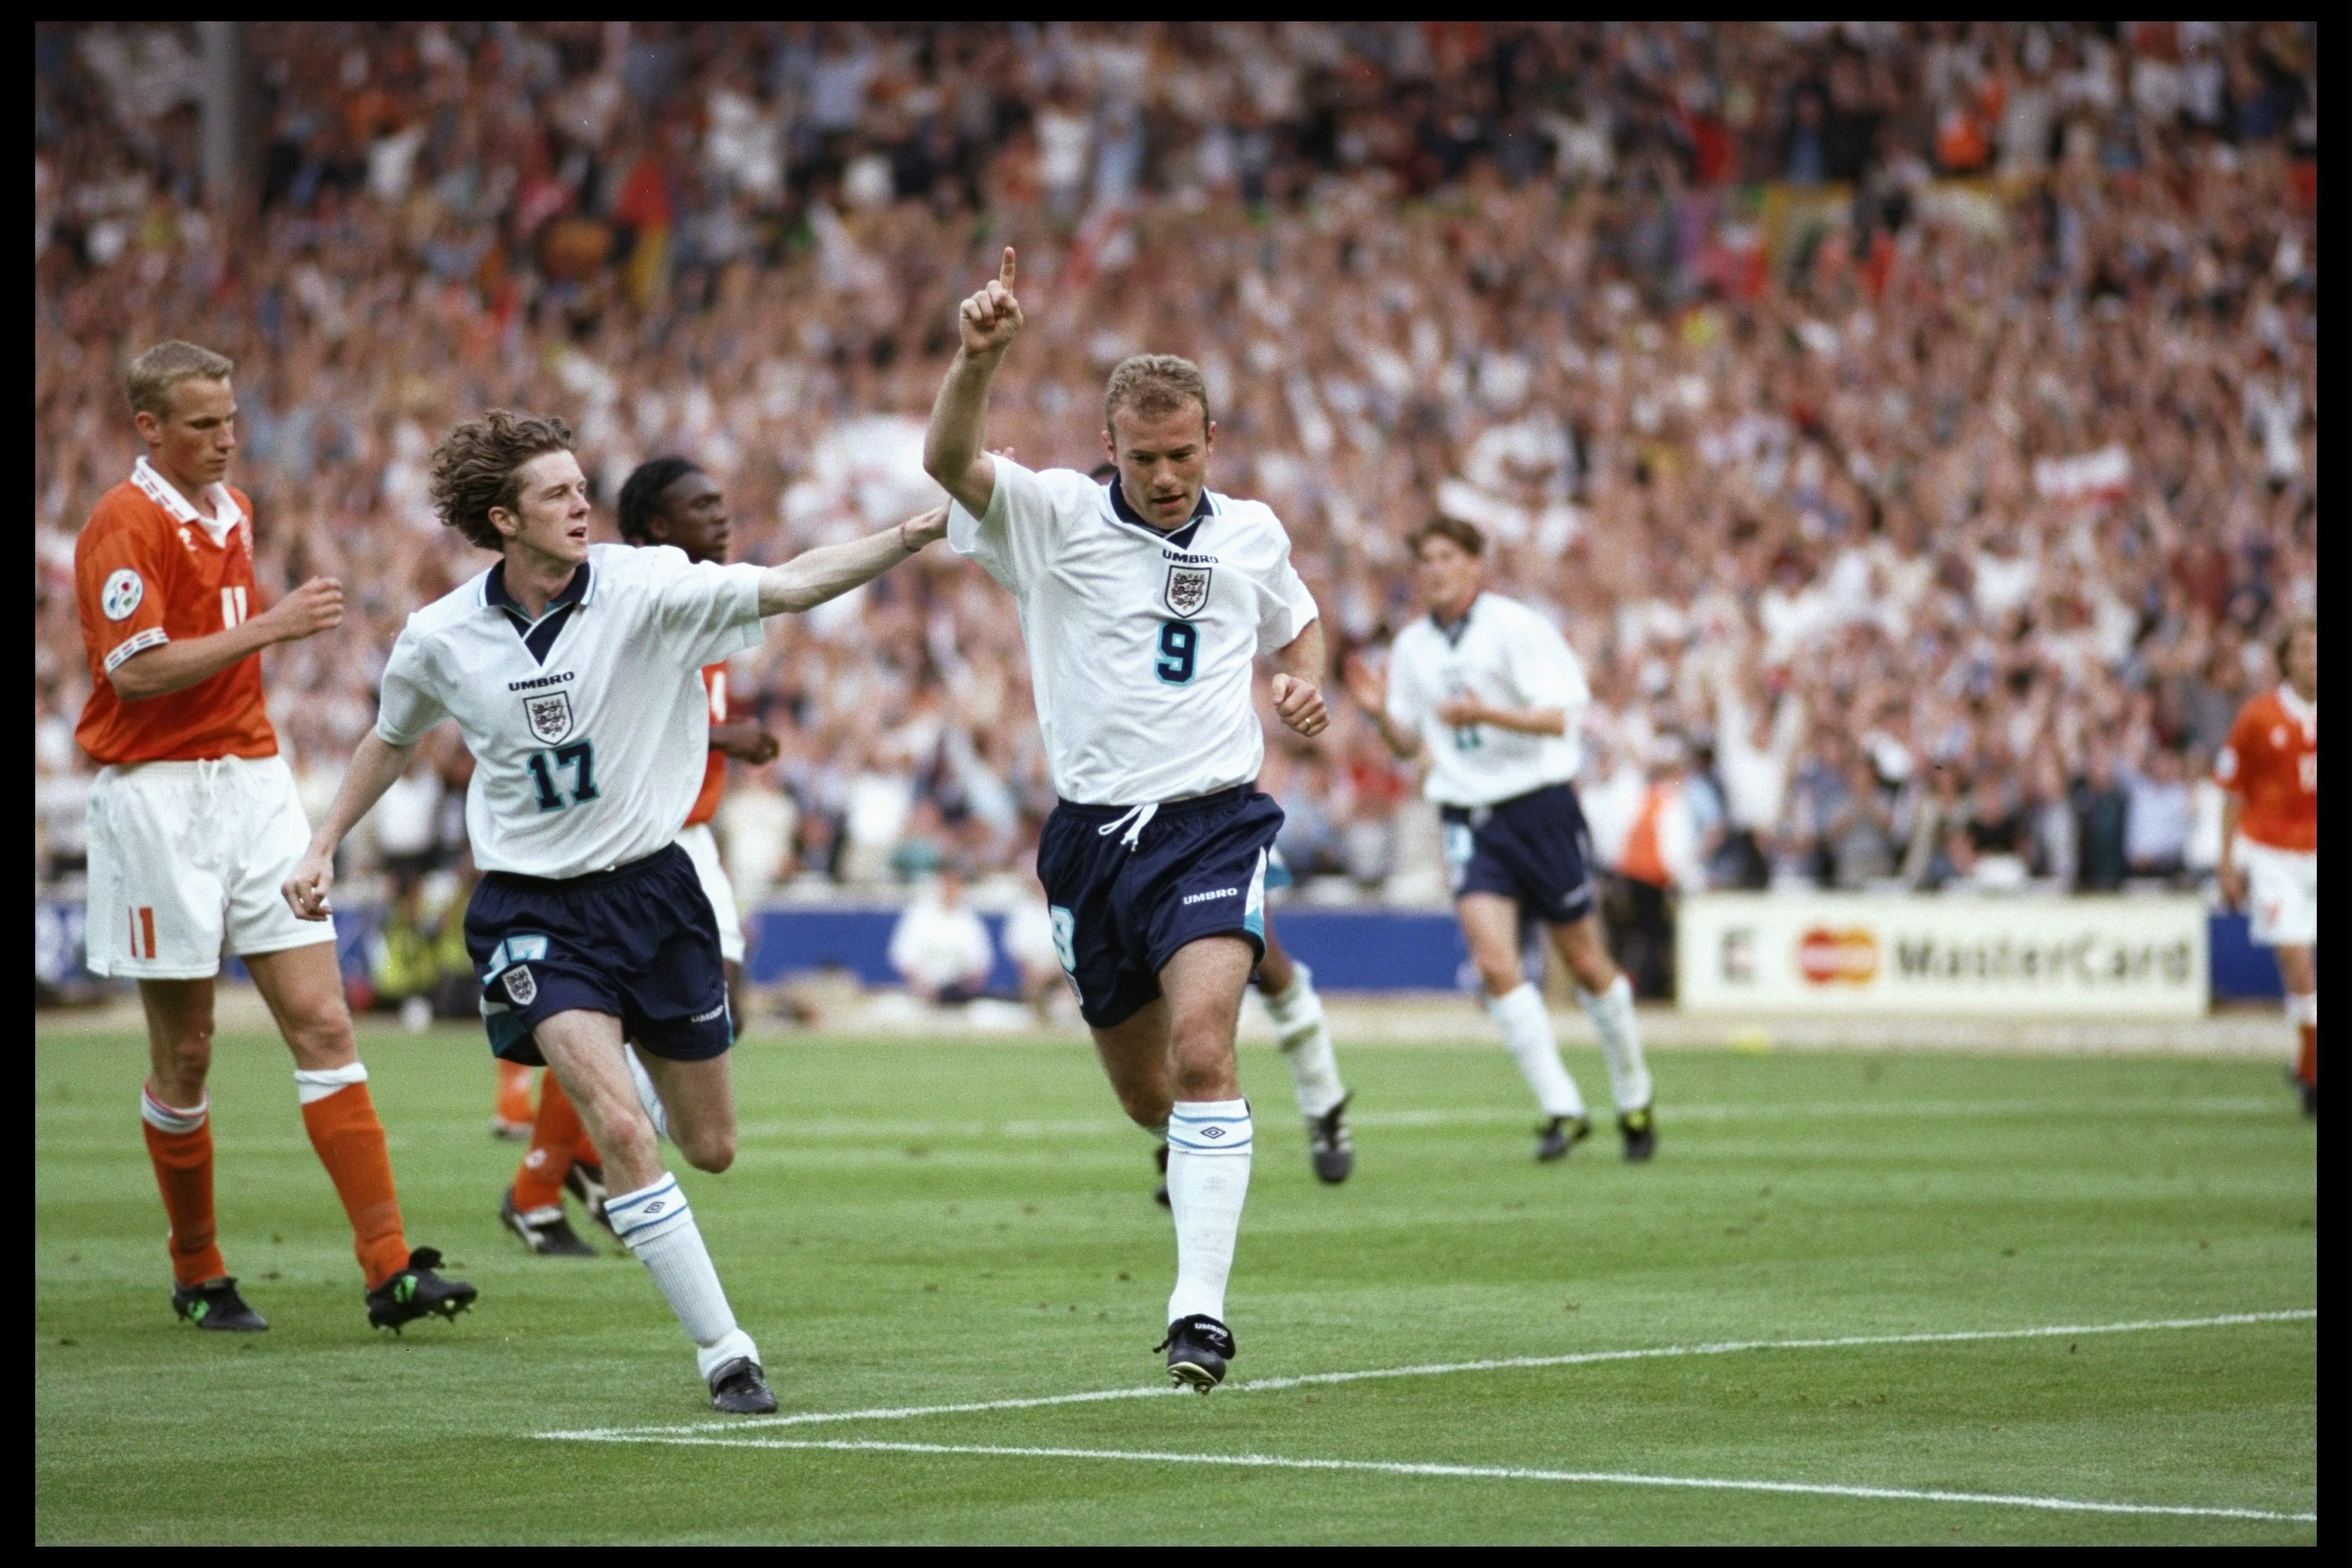 Alan Shearer was in superb form at Euro '96, scoring twice in a memorable 4-1 win over Holland